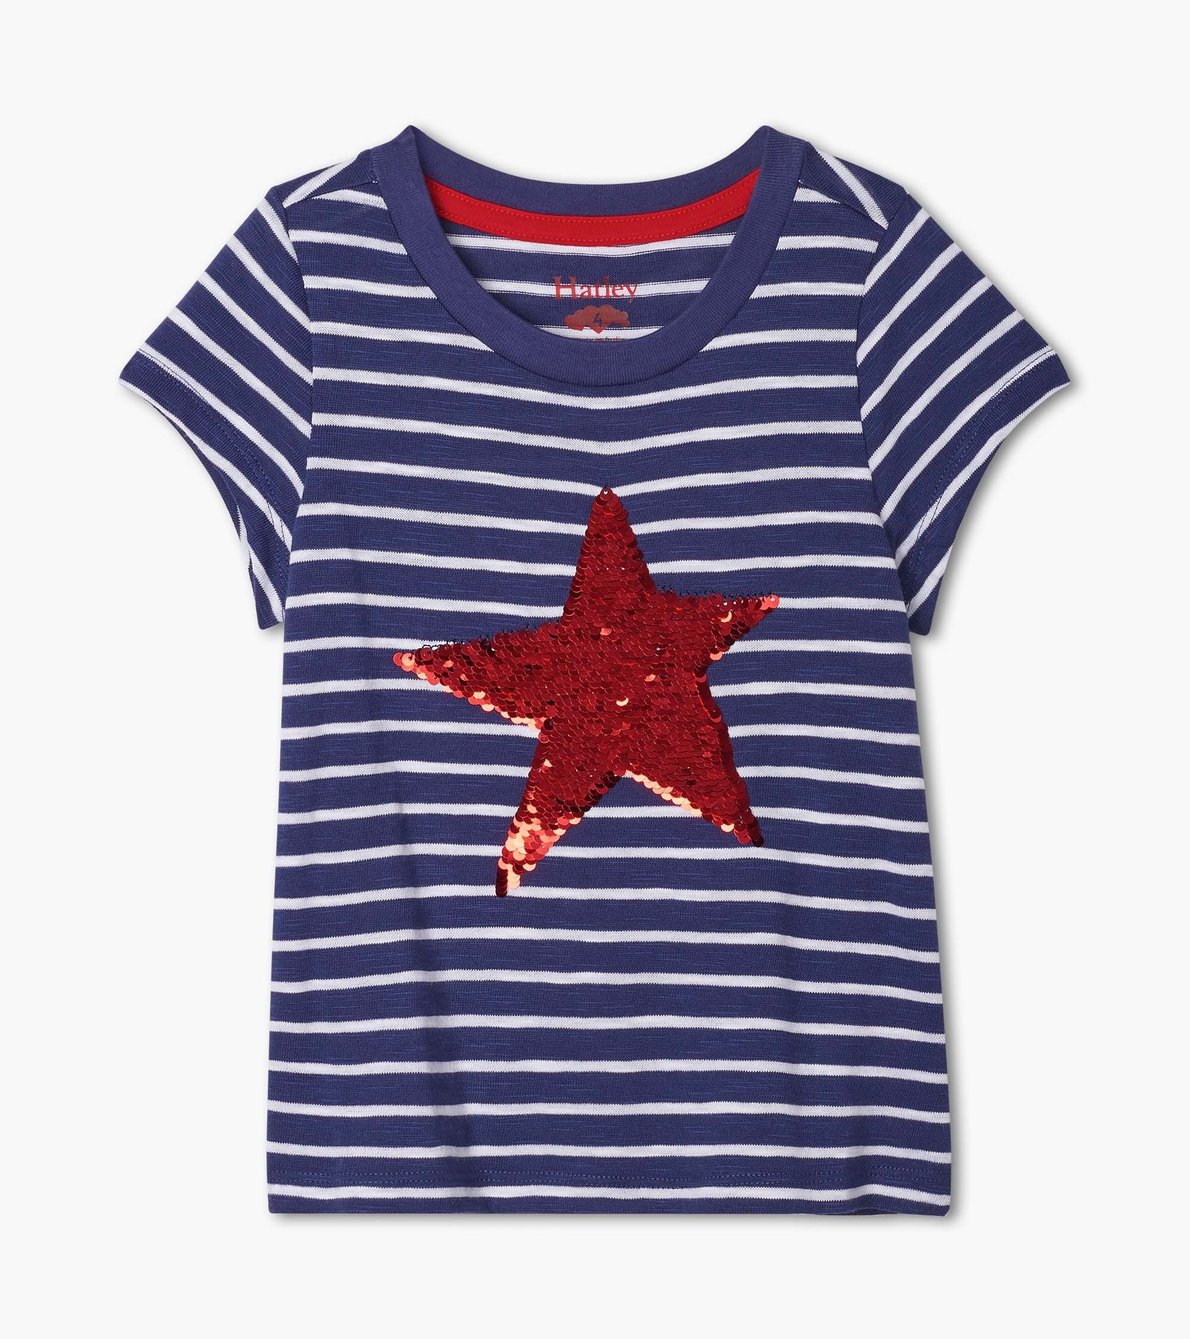 View larger image of Red Star Flip Sequins Graphic Tee